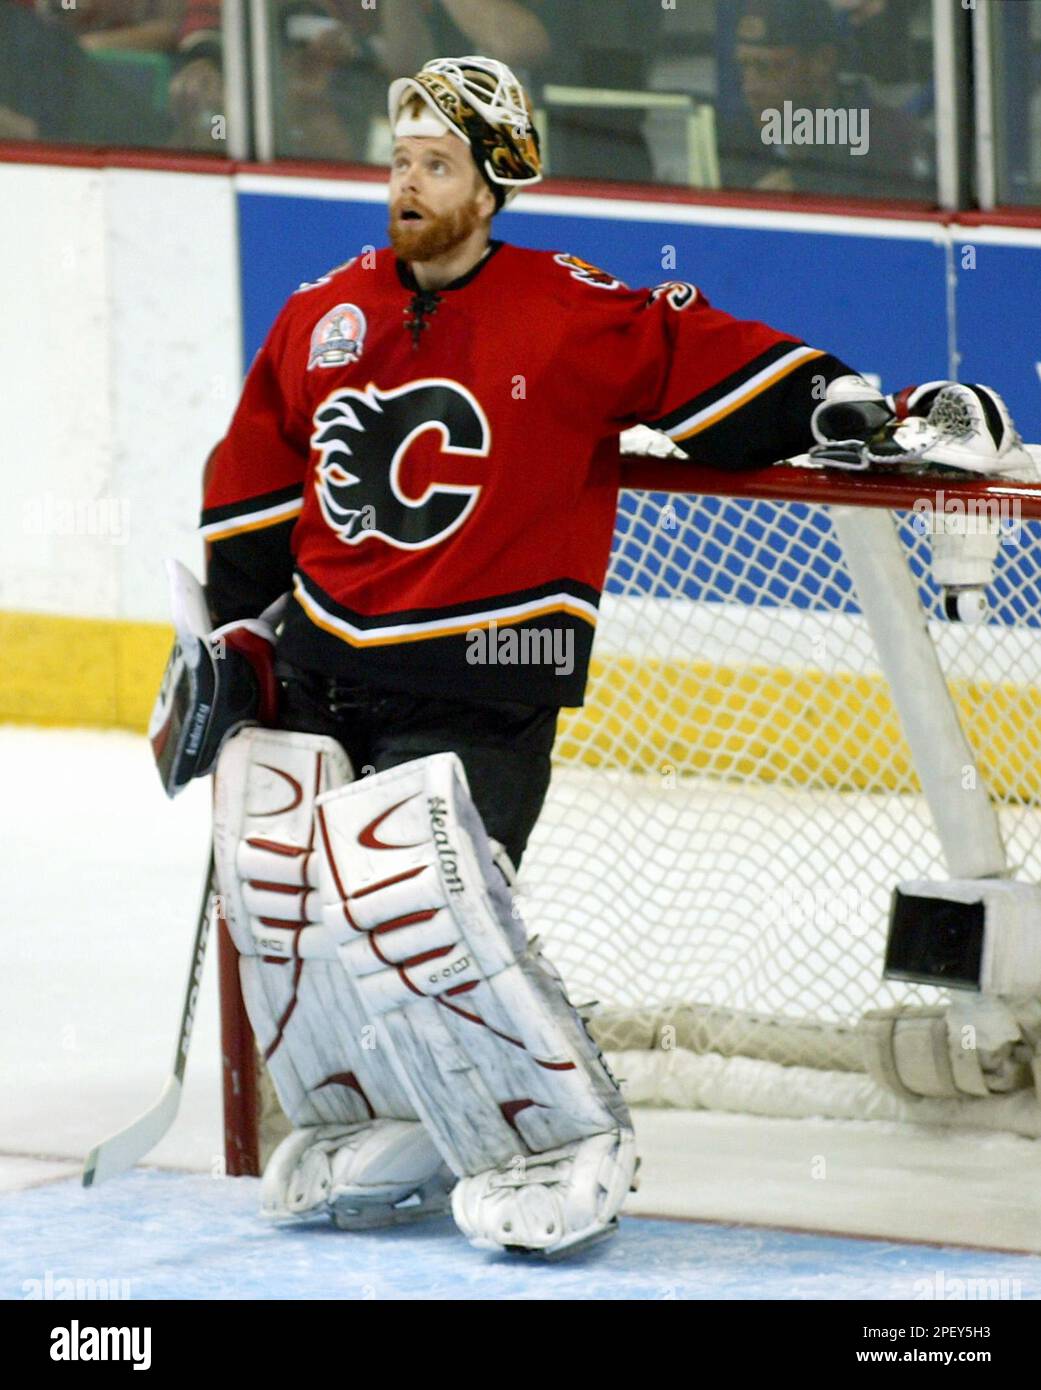 Where are they now? A look at every Calgary Flames goalie since Miikka  Kiprusoff - The Win Column